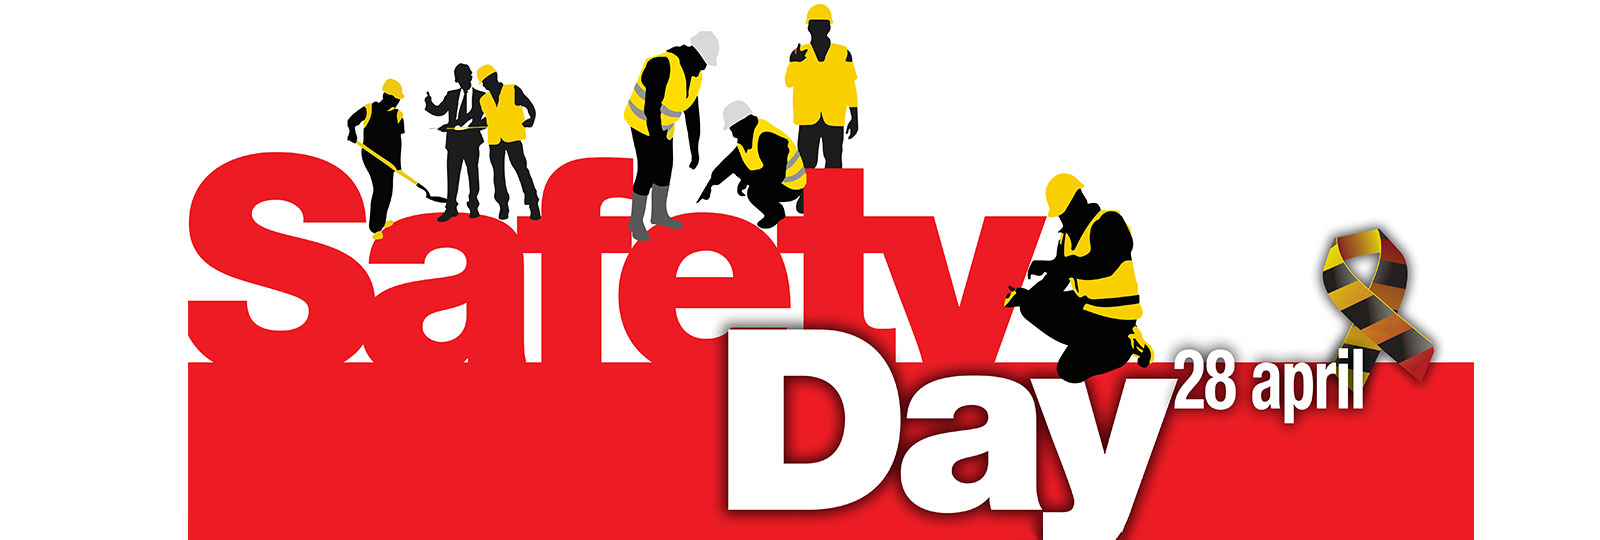 WORLD DAY FOR SAFETY AND HEALTH AT WORK | News Trevi Group English site 1